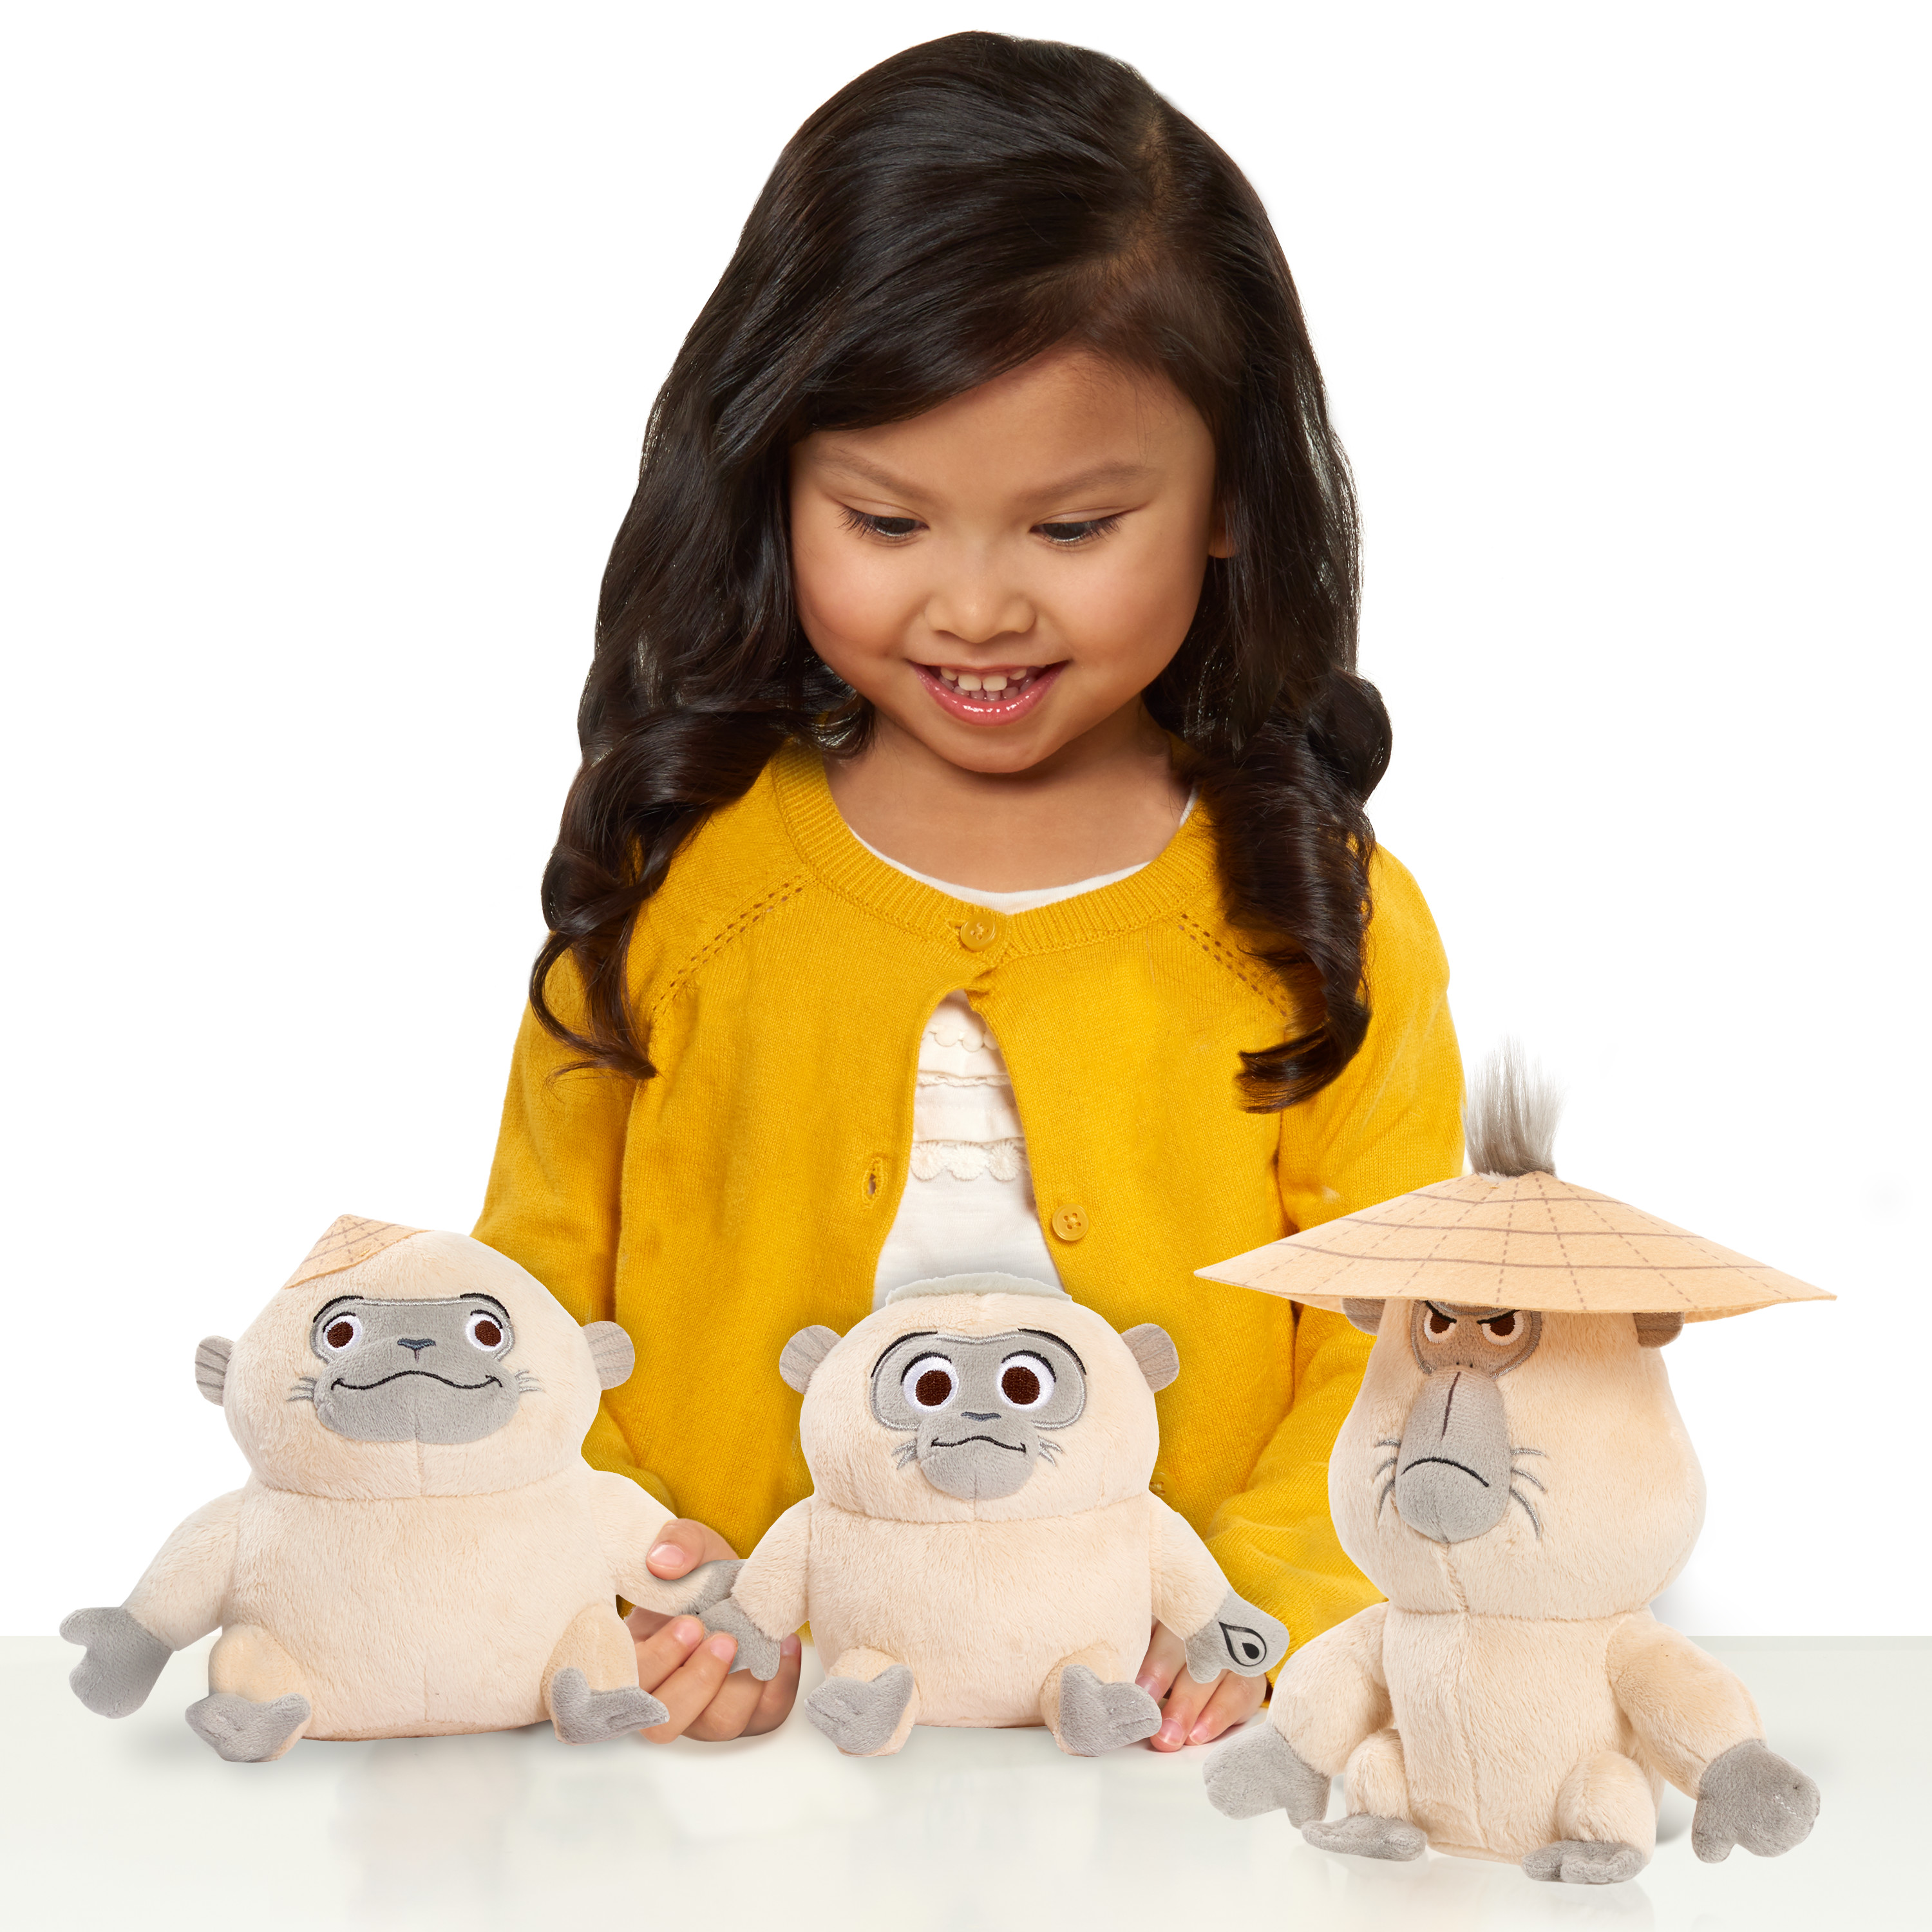 Disney Raya and the Last Dragon Chattering Ongis Plush, 3-piece set, connecting stuffed animals with sound, Officially Licensed Kids Toys for Ages 3 Up, Gifts and Presents - image 3 of 8